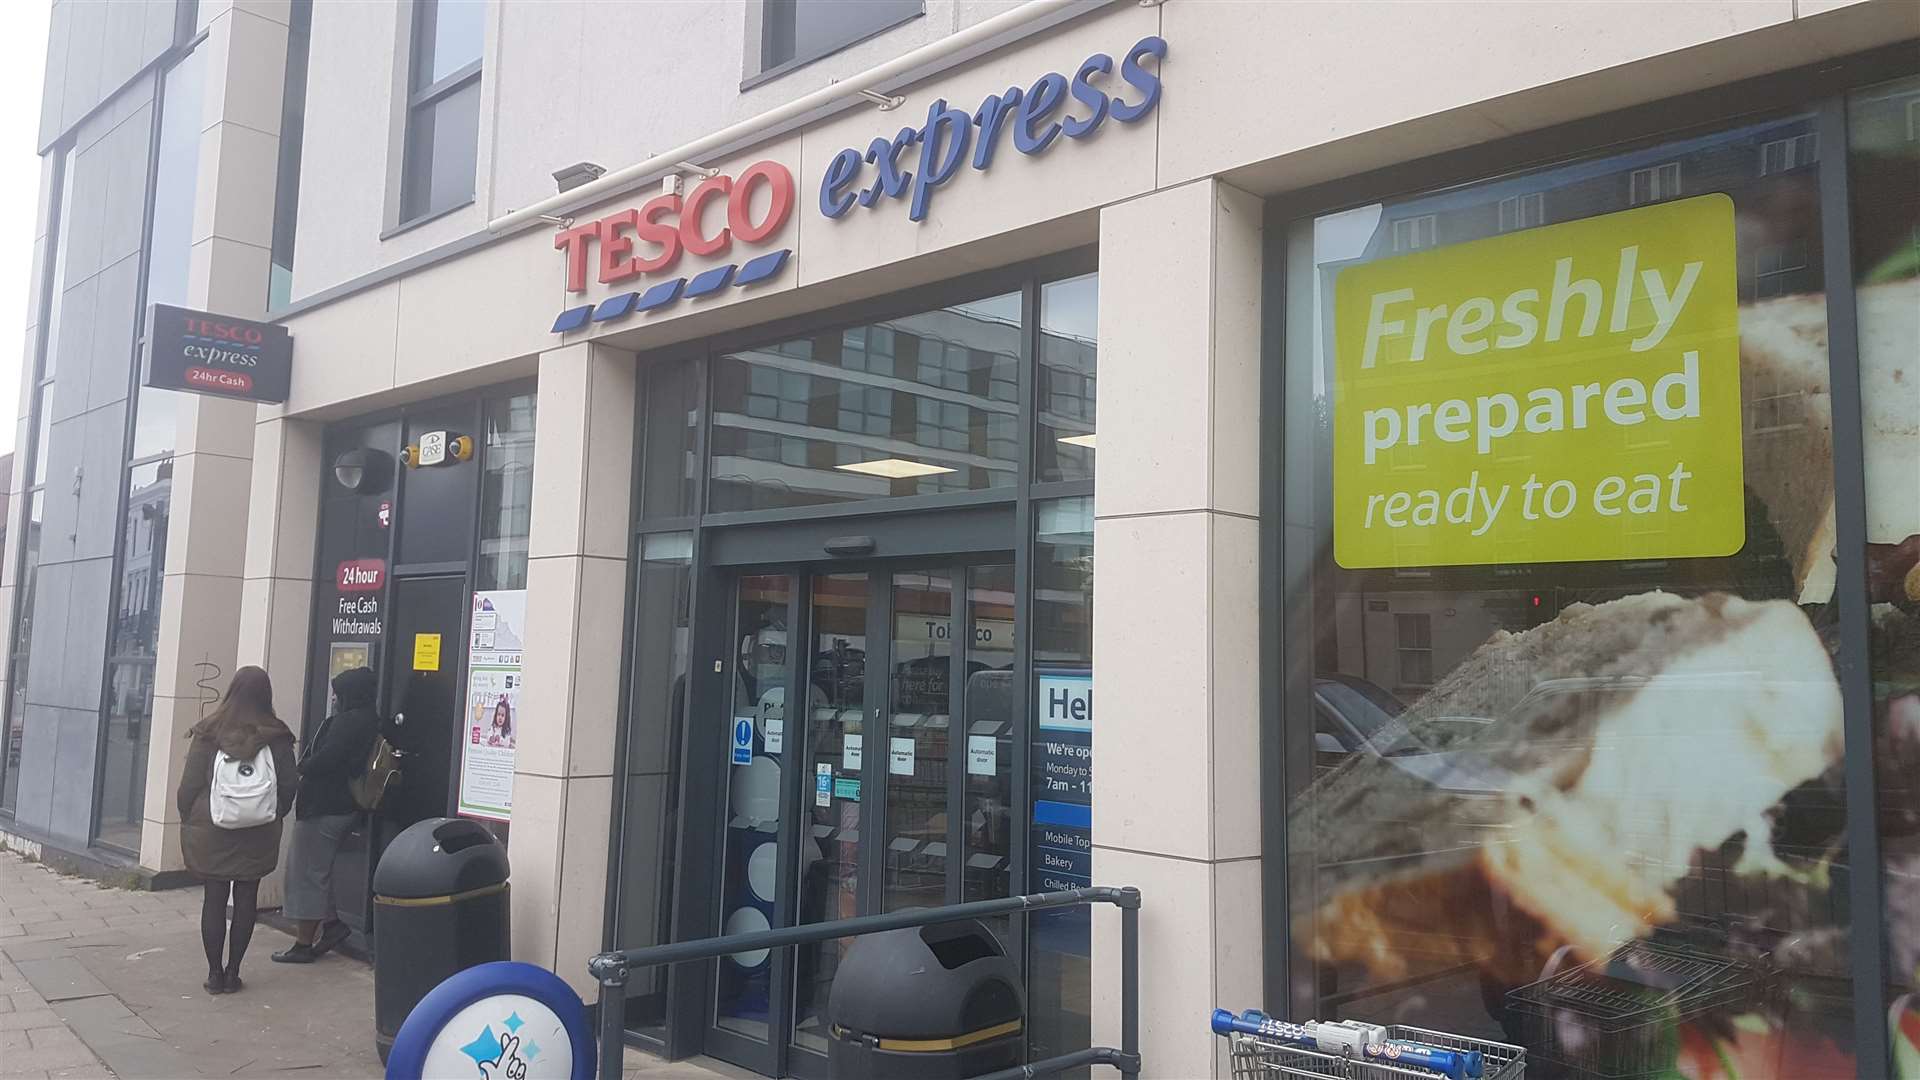 The Tesco Express in New Dover Road (12941289)